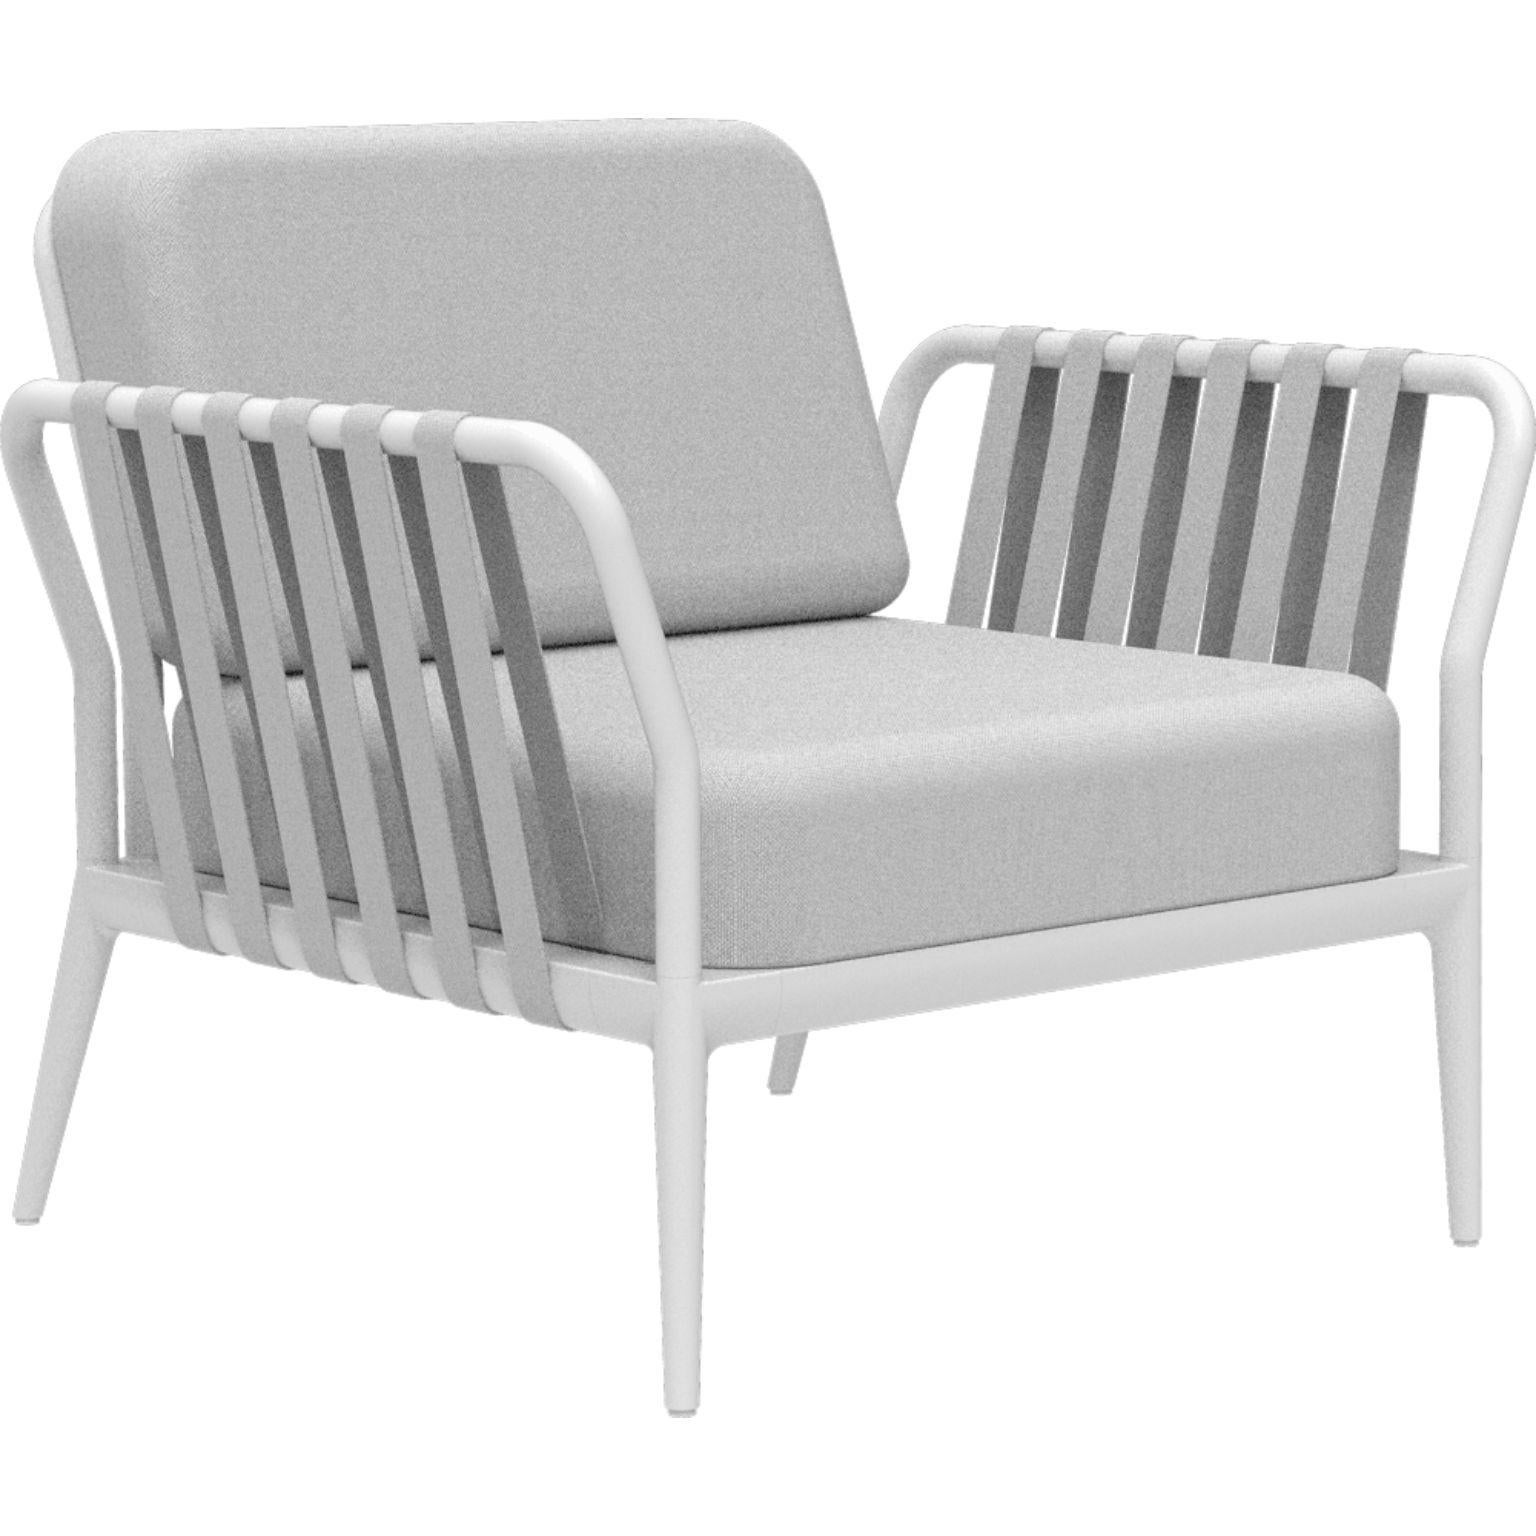 Ribbons white armchair by MOWEE
Dimensions: D83 x W91 x H81 cm (Seat Height 42 cm)
Material: Aluminum, Upholstery
Weight: 20 kg
Also Available in different colours and finishes. 

An unmistakable collection for its beauty and robustness. A